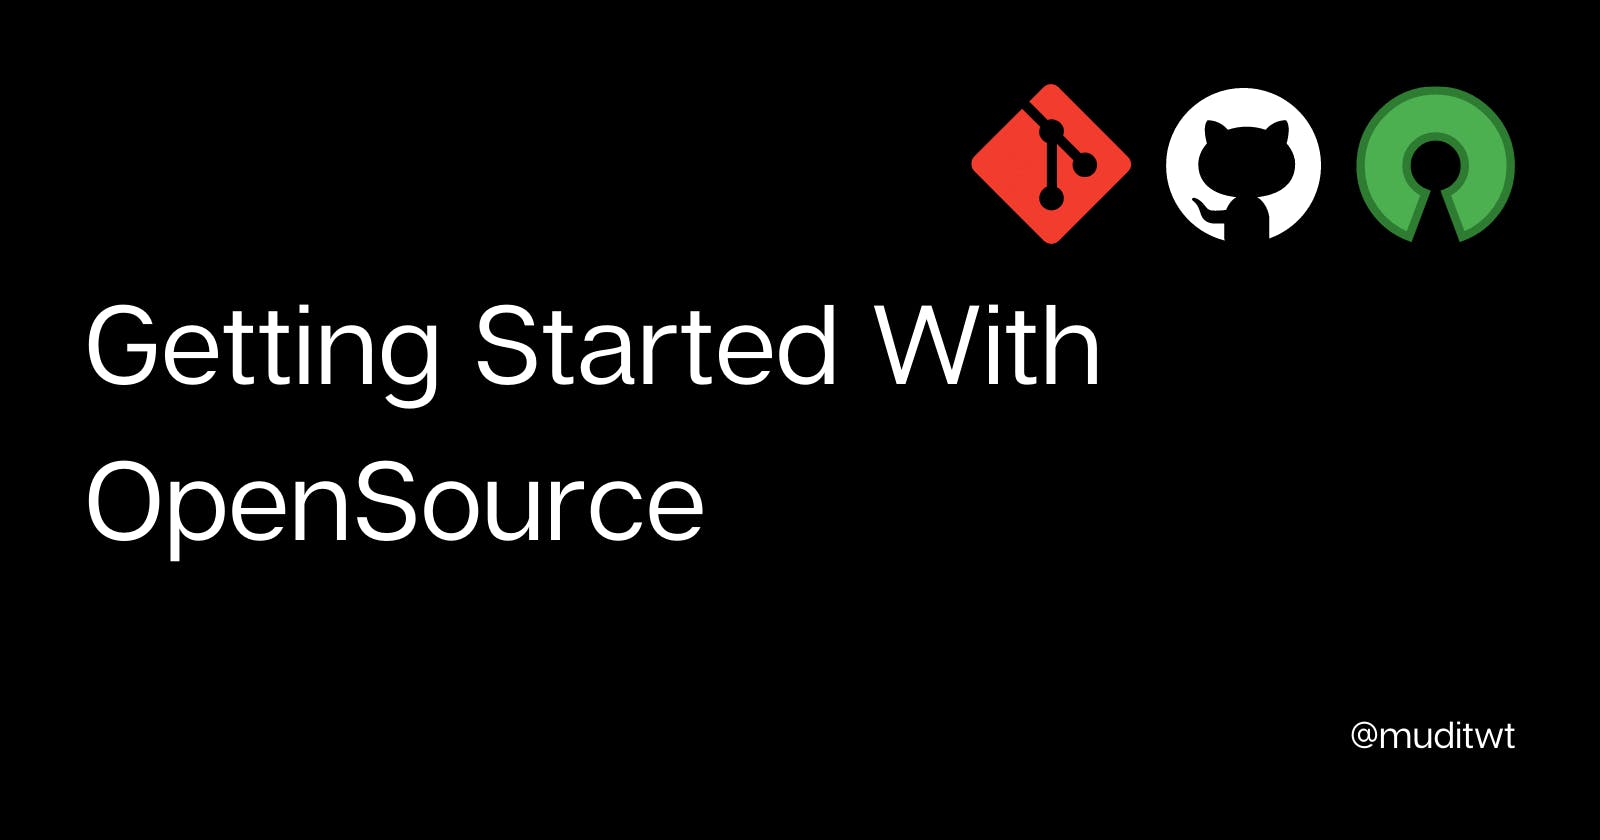 Getting Started With Open Source